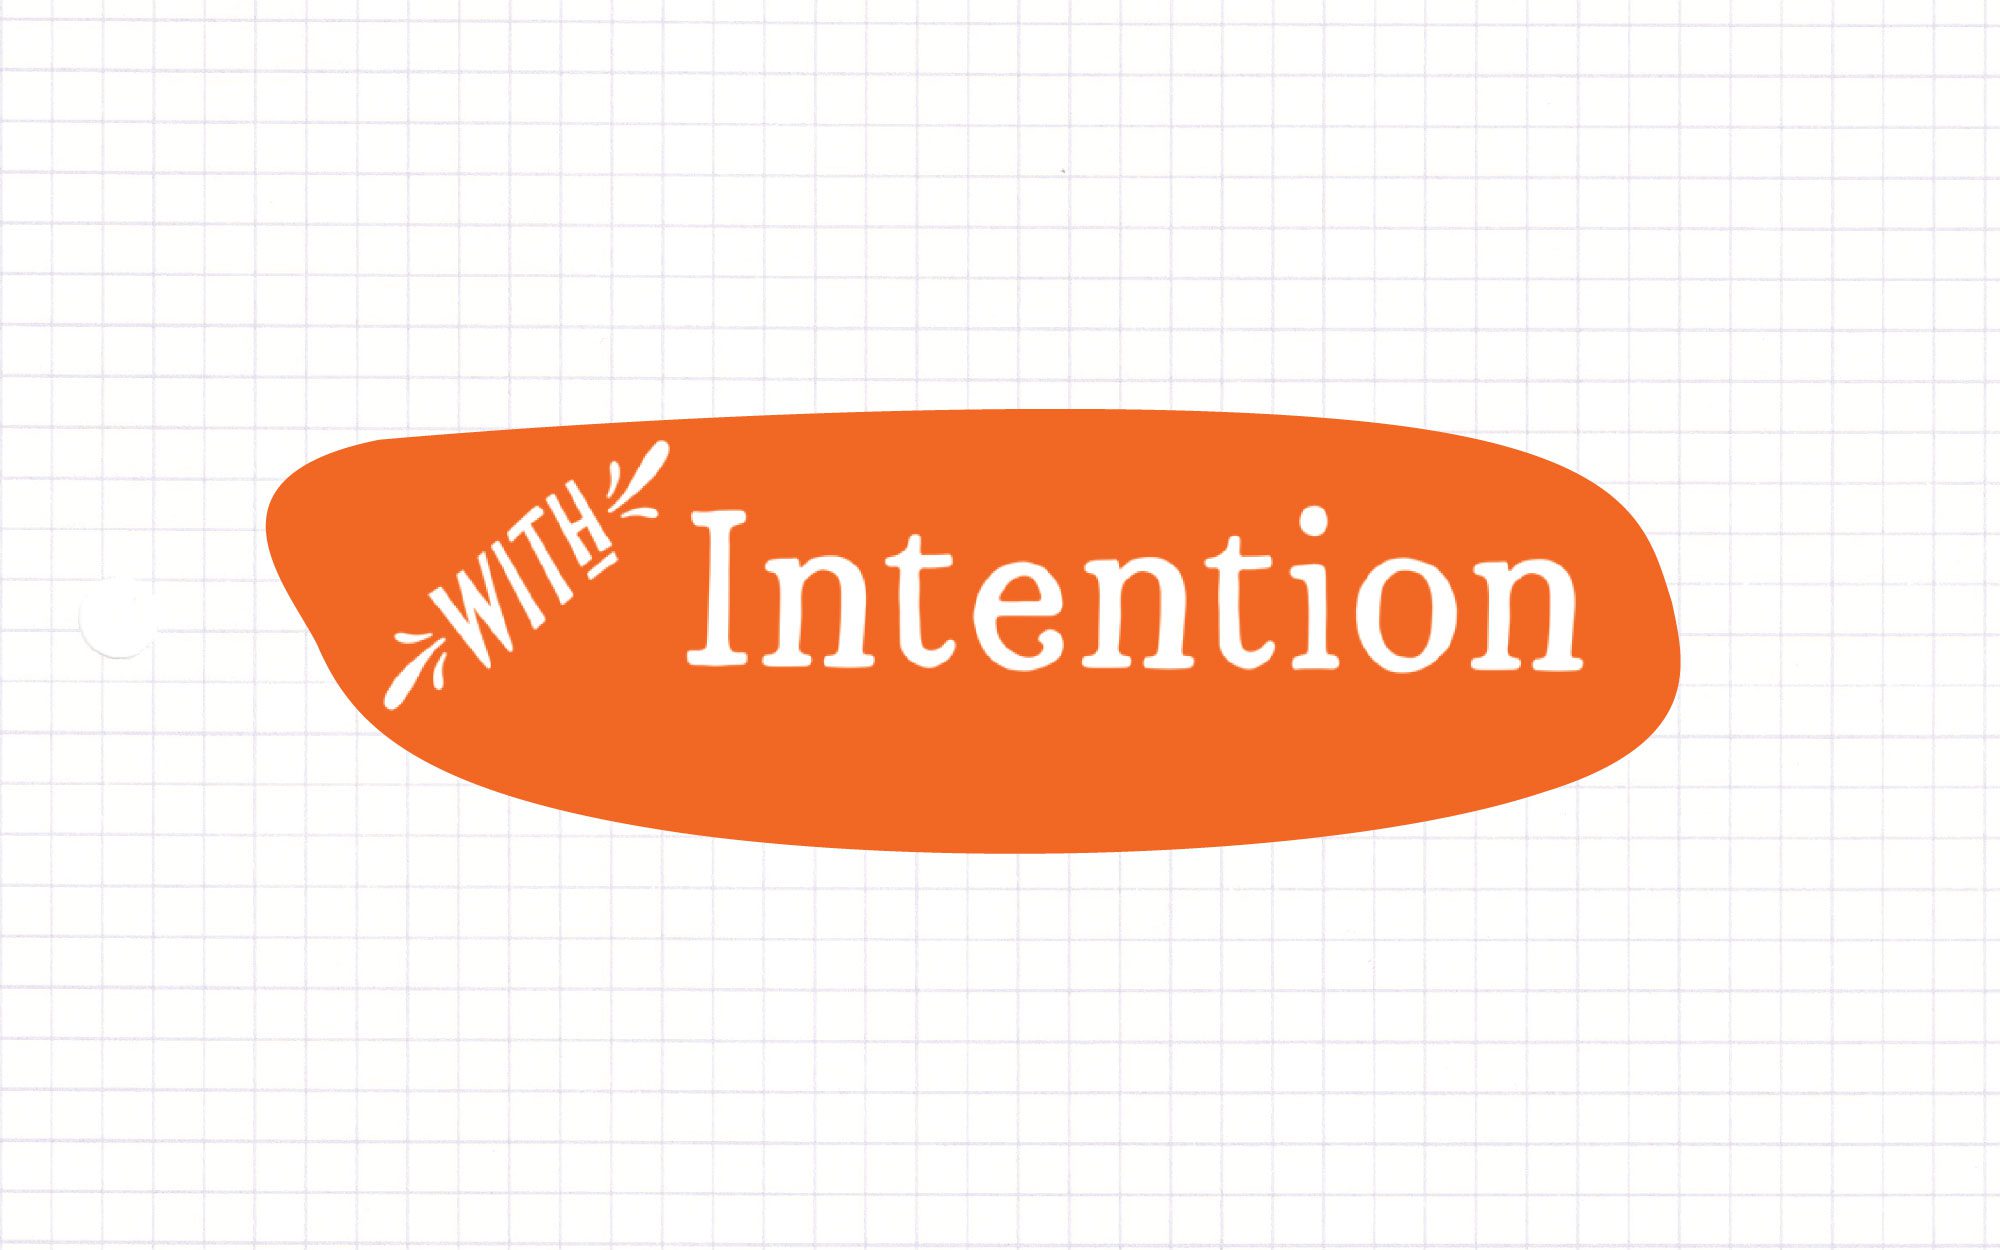 With Intention Infographic